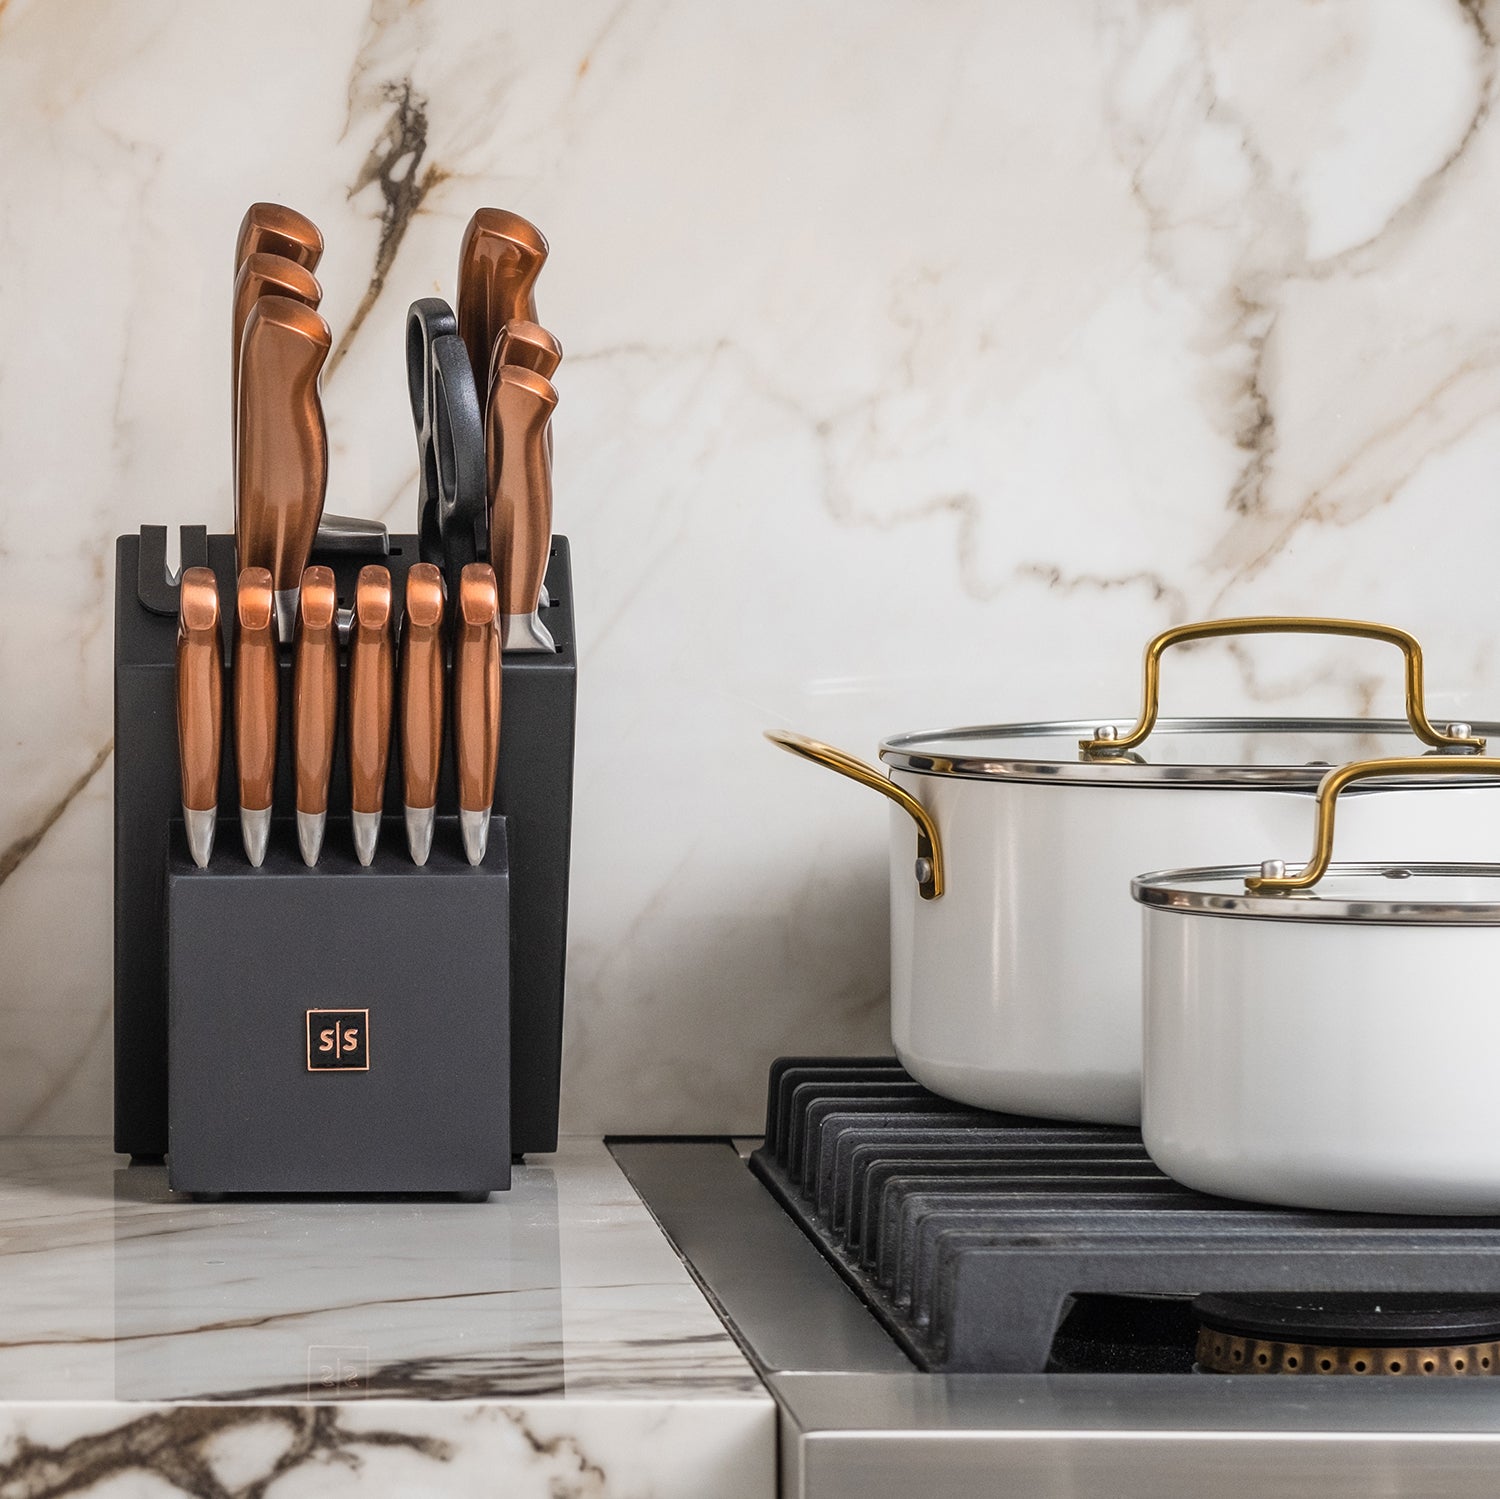  Copper Knife Set with Block - 14 PC Self Sharpening